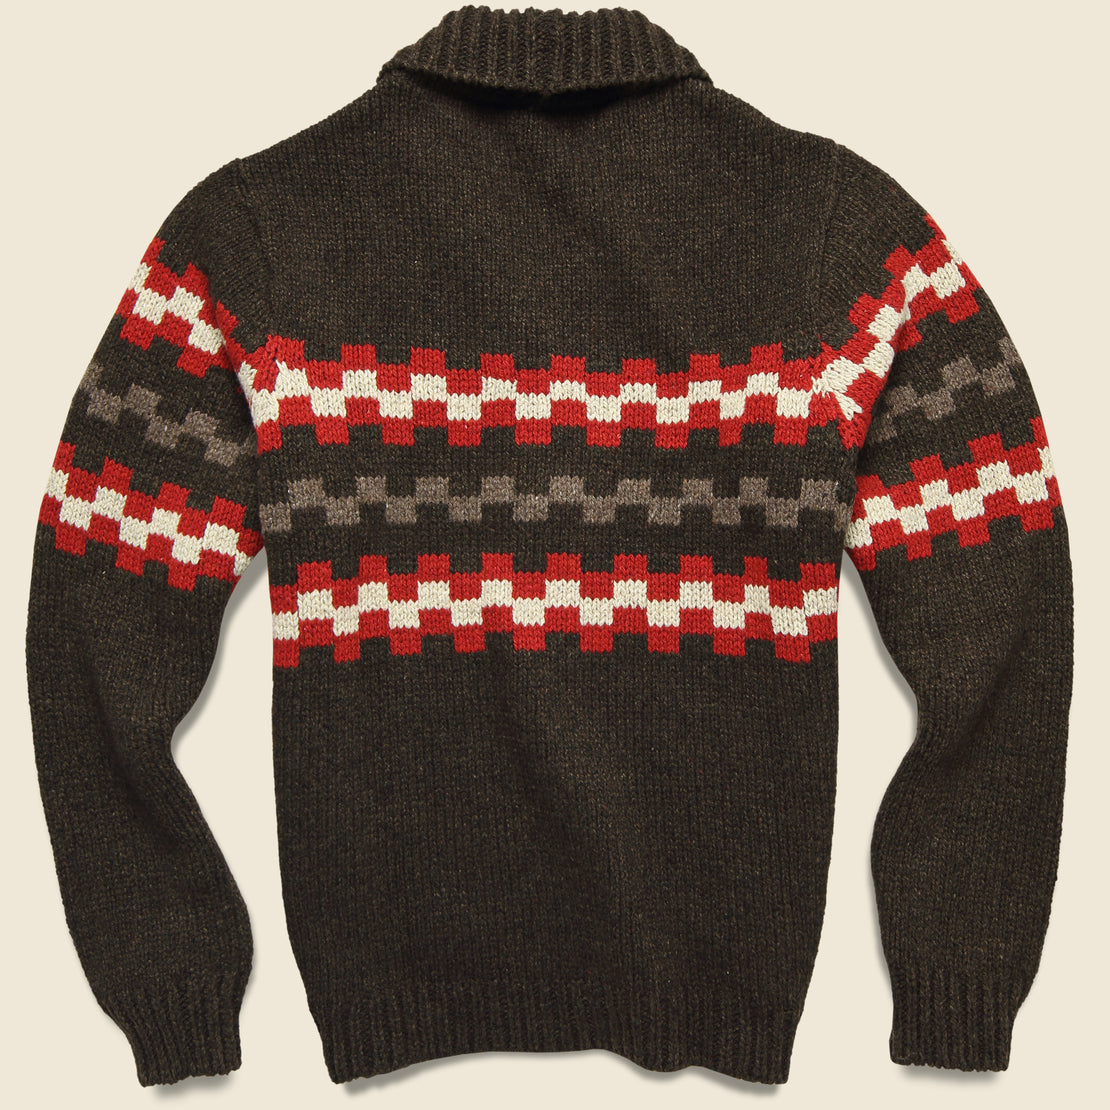 New Mexico Wool Sweater - Chocolate